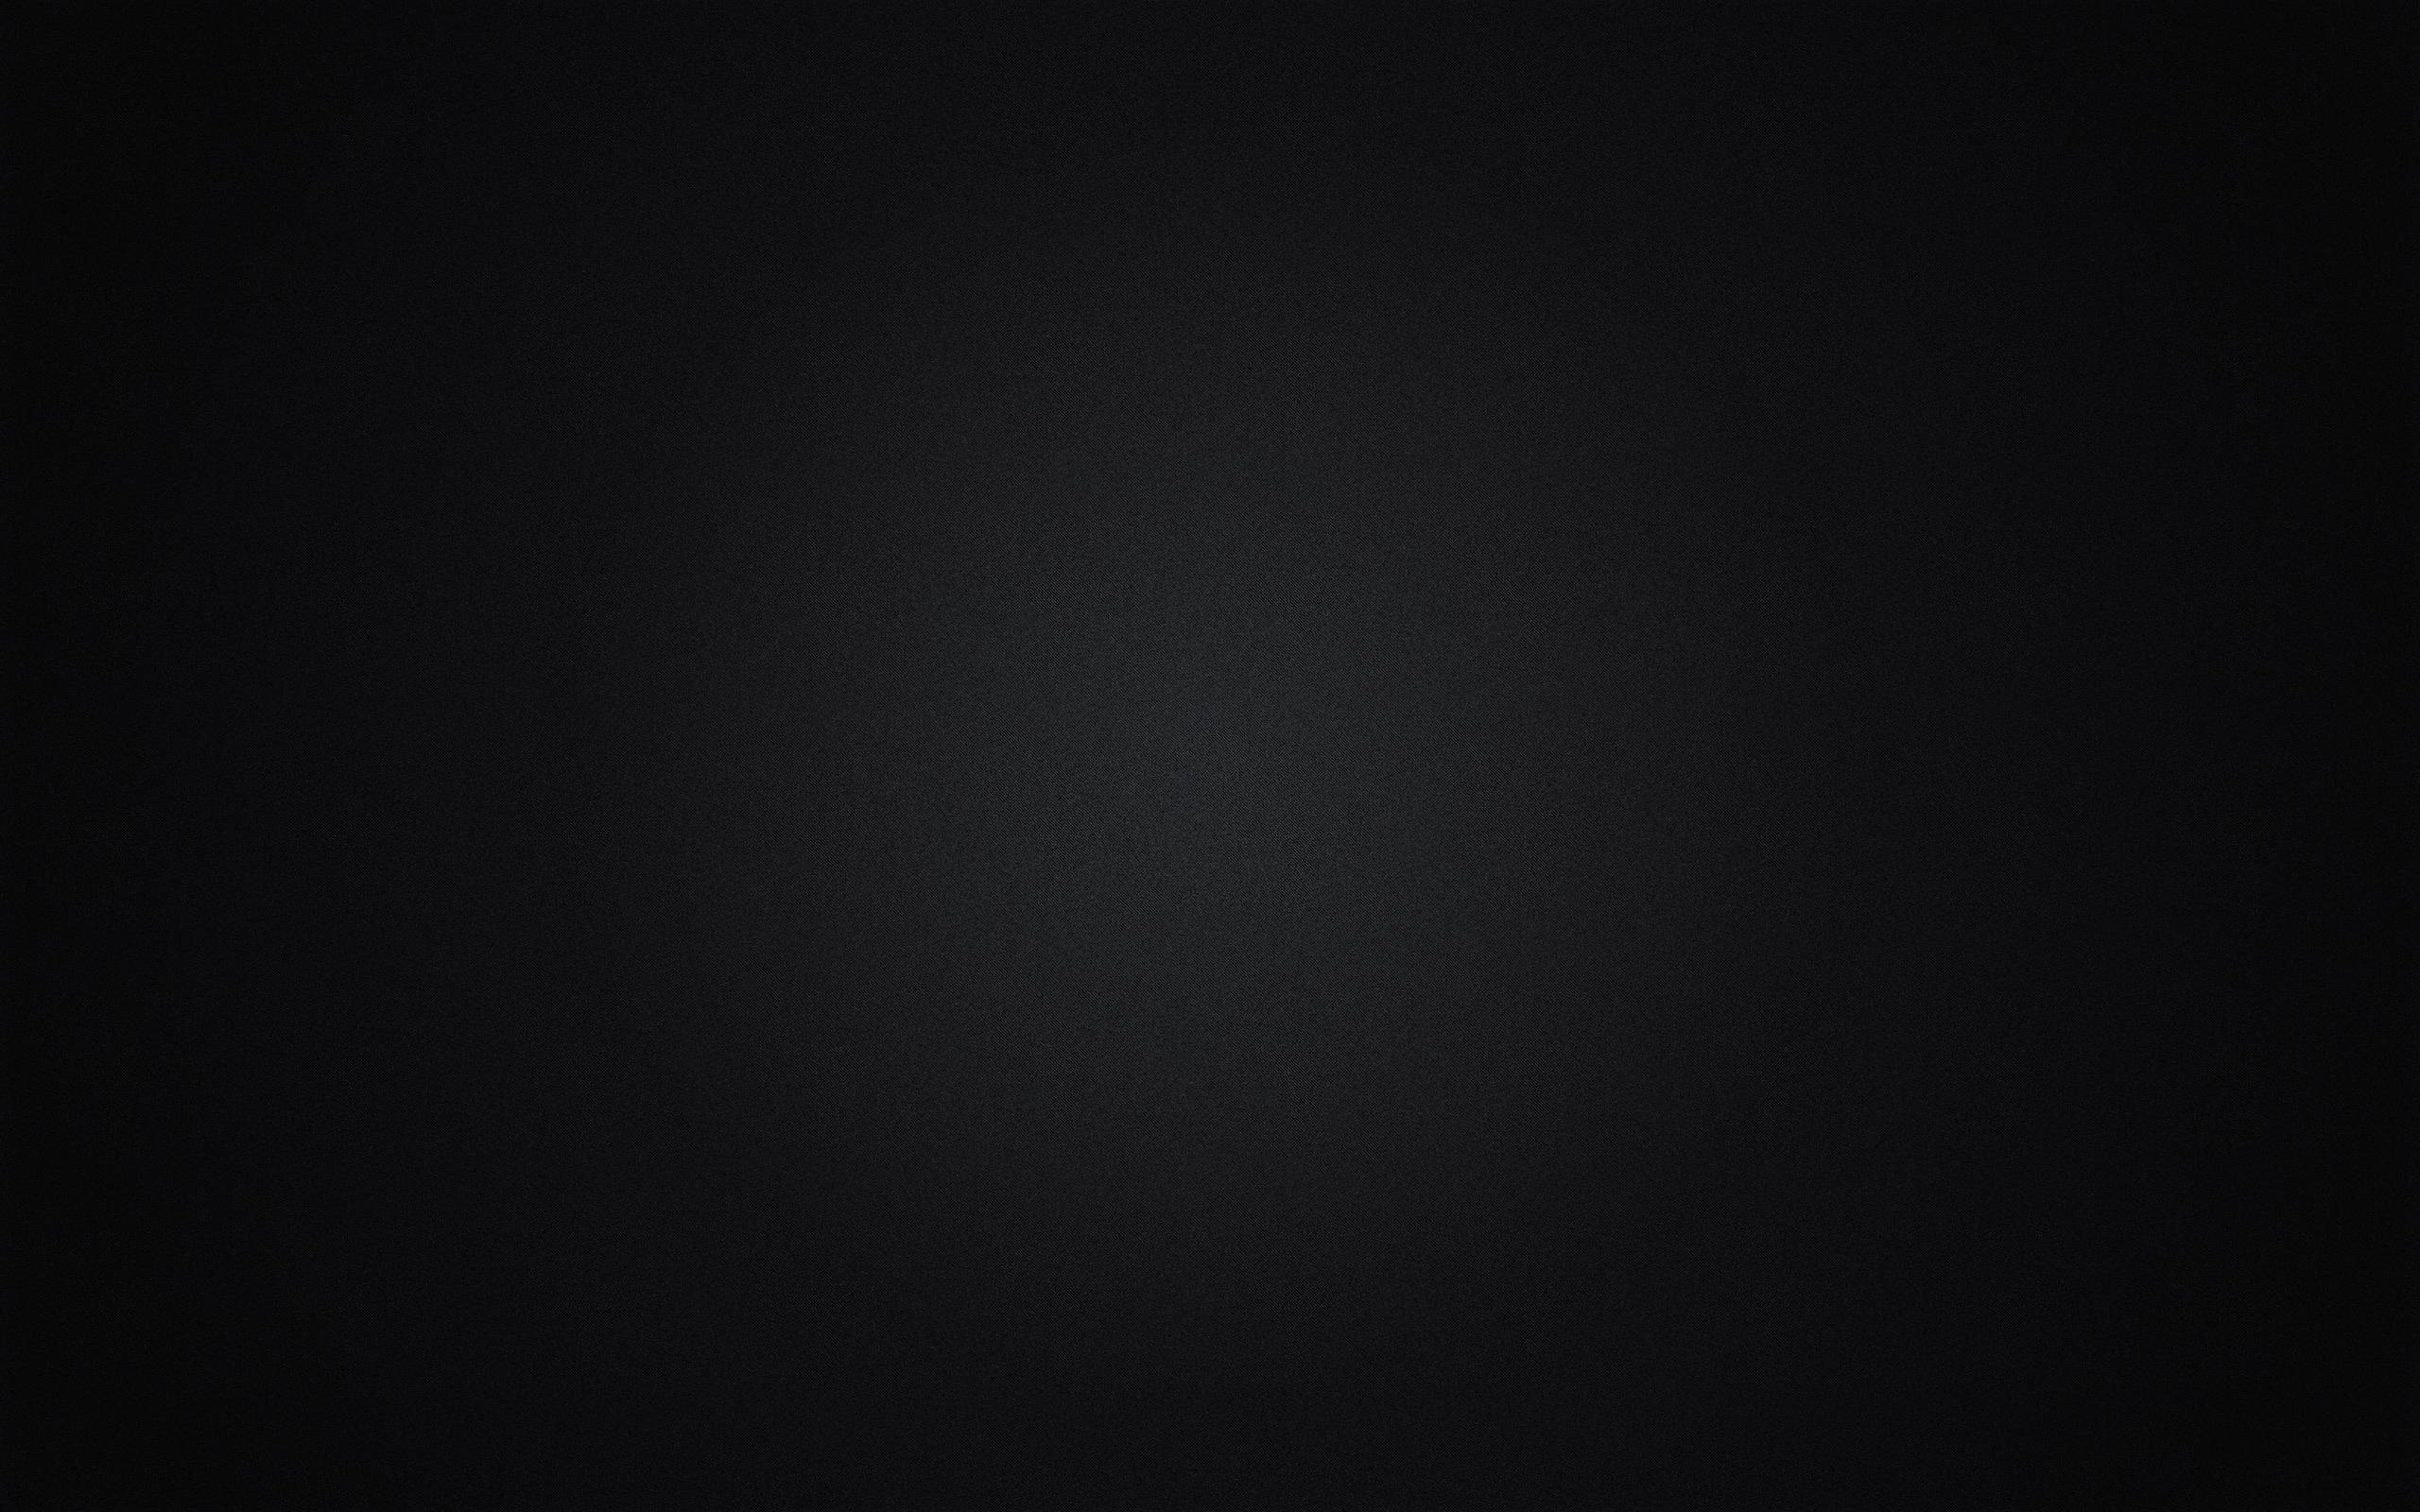 Black Backgrounds Pic - Wallpaper Cave